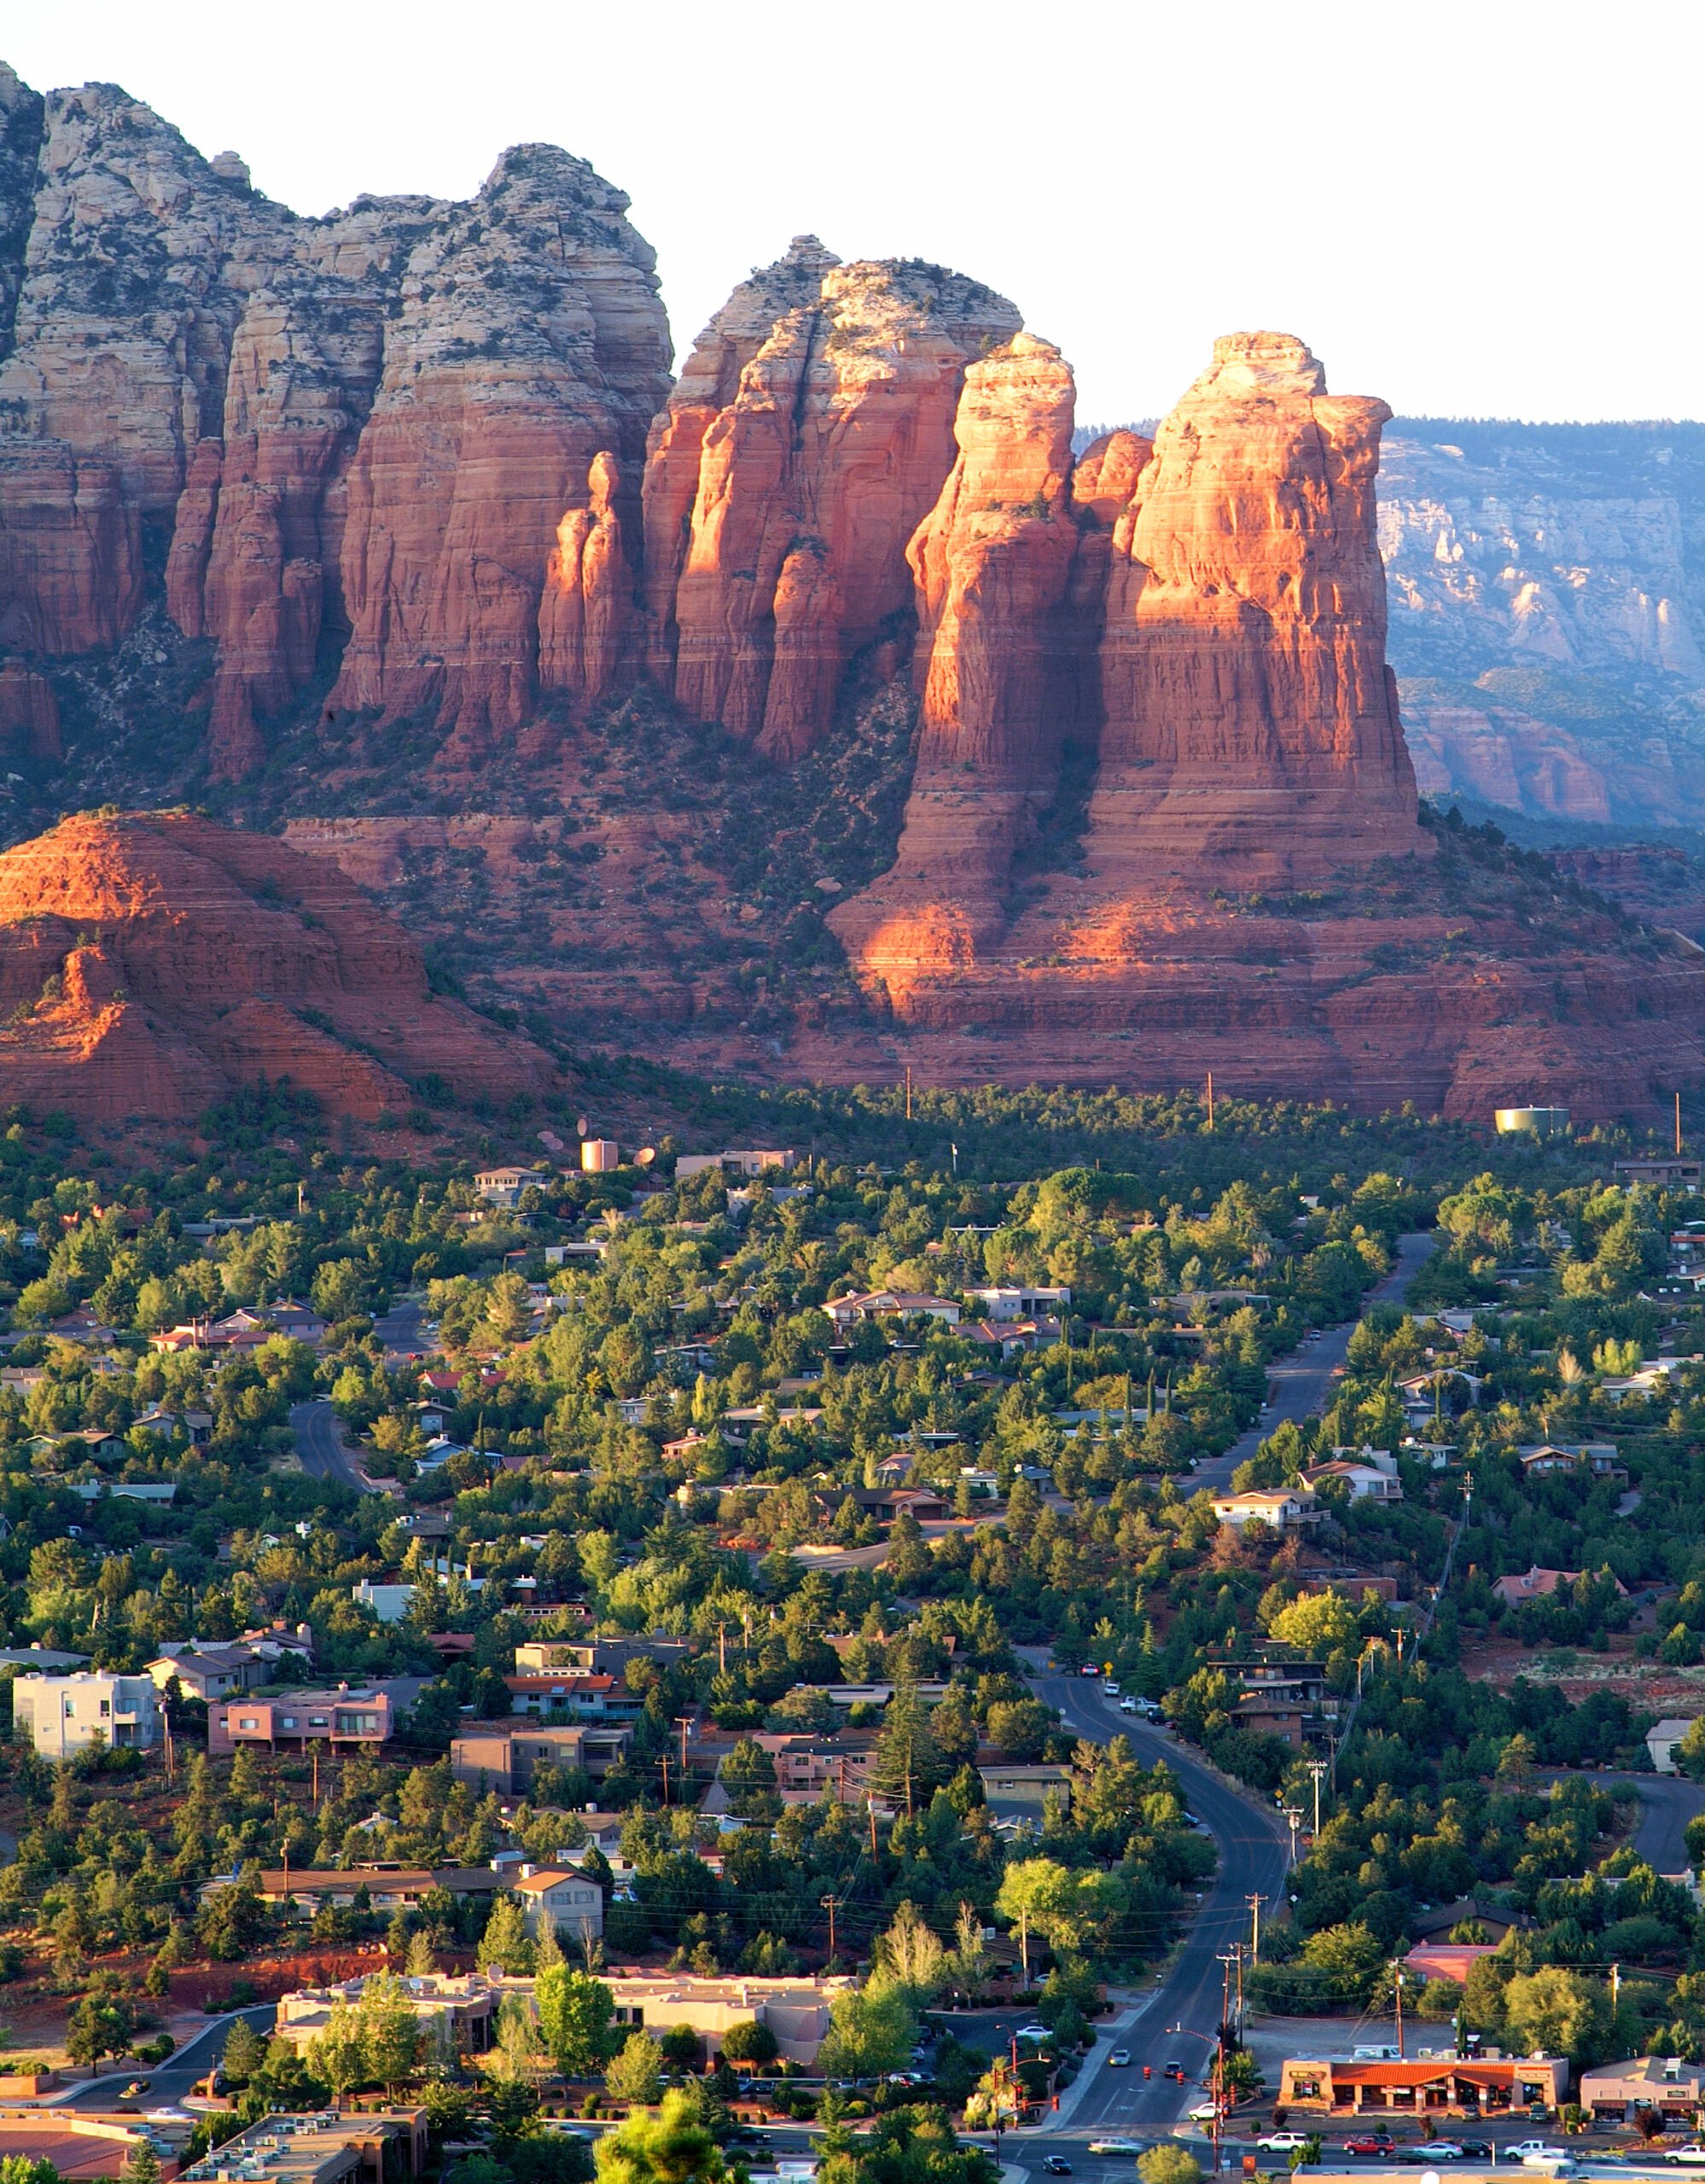 3-Day American Road Trip Ideas For The Ultimate Travel Experience ARIZONA